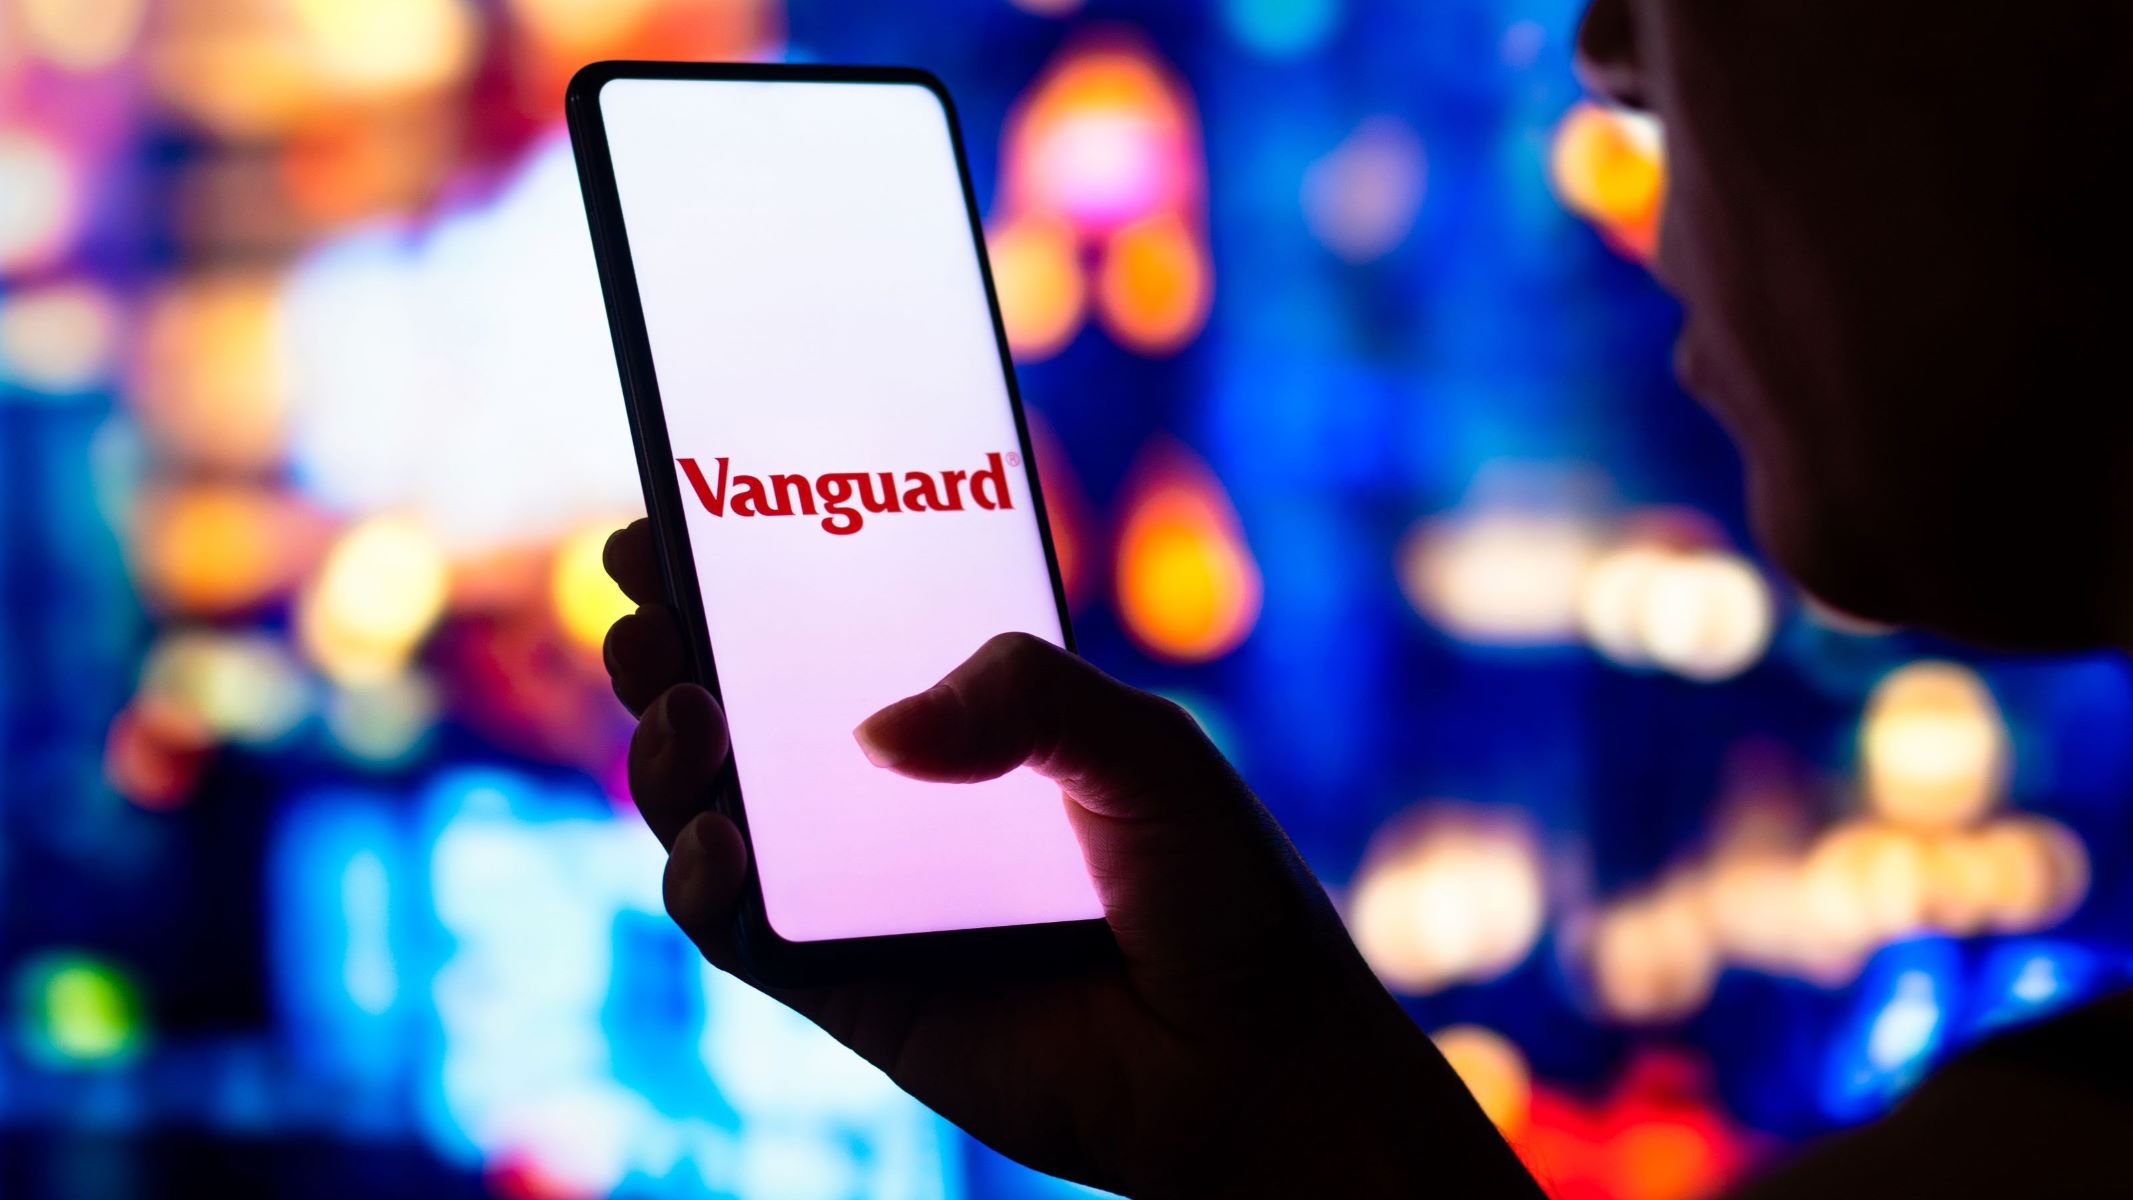 How Do I Set Up Automatic Investments On Vanguard?